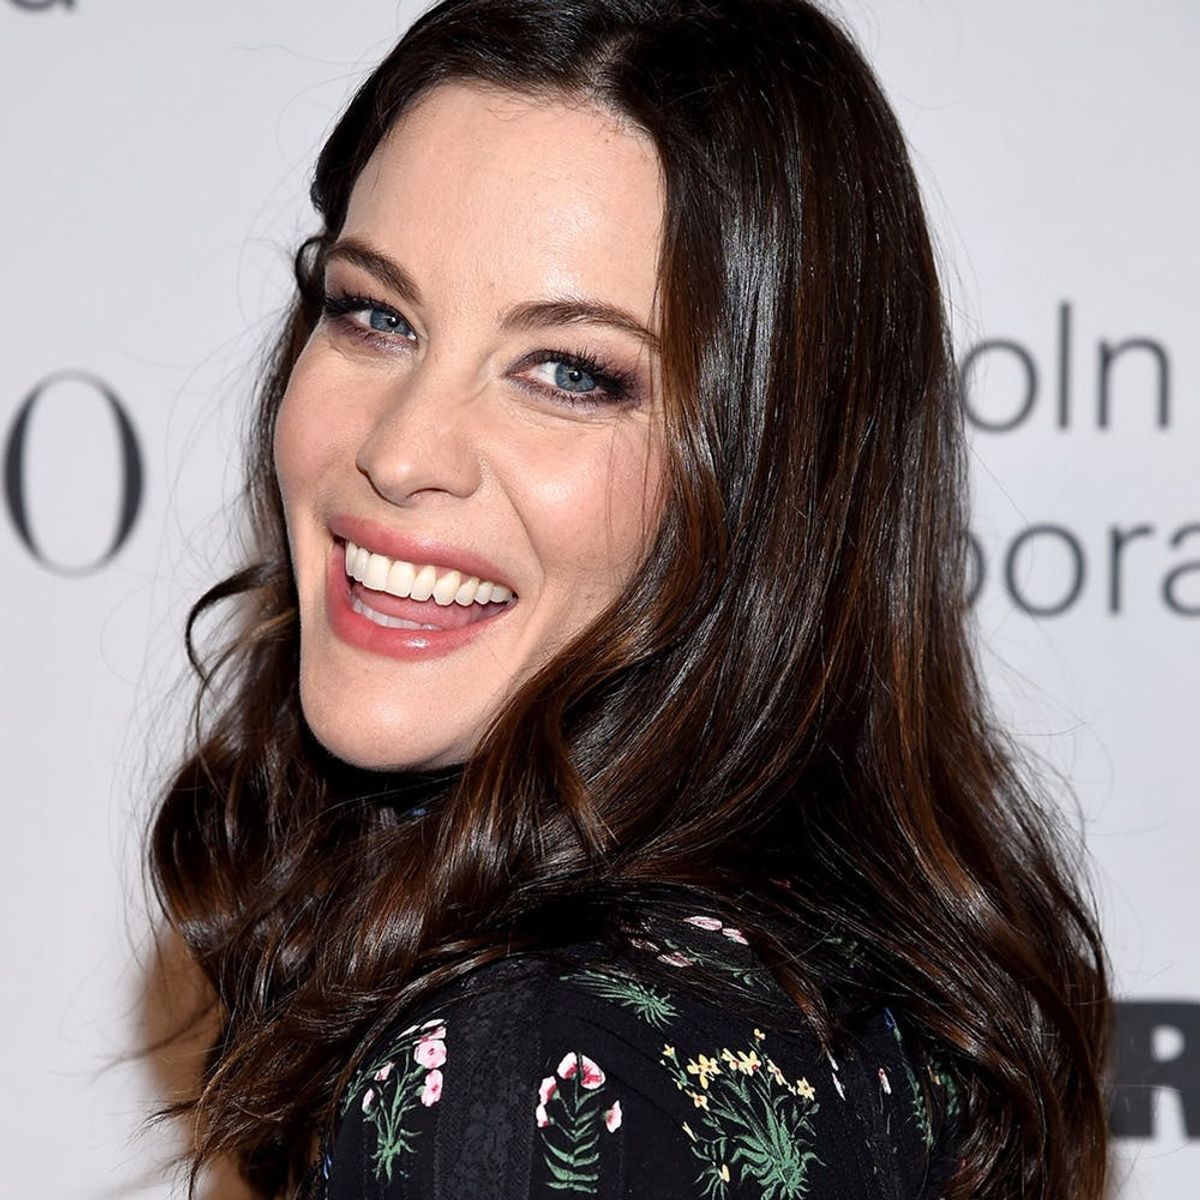 Liv Tyler Just Revealed She’s About to Be a Mom… Again!